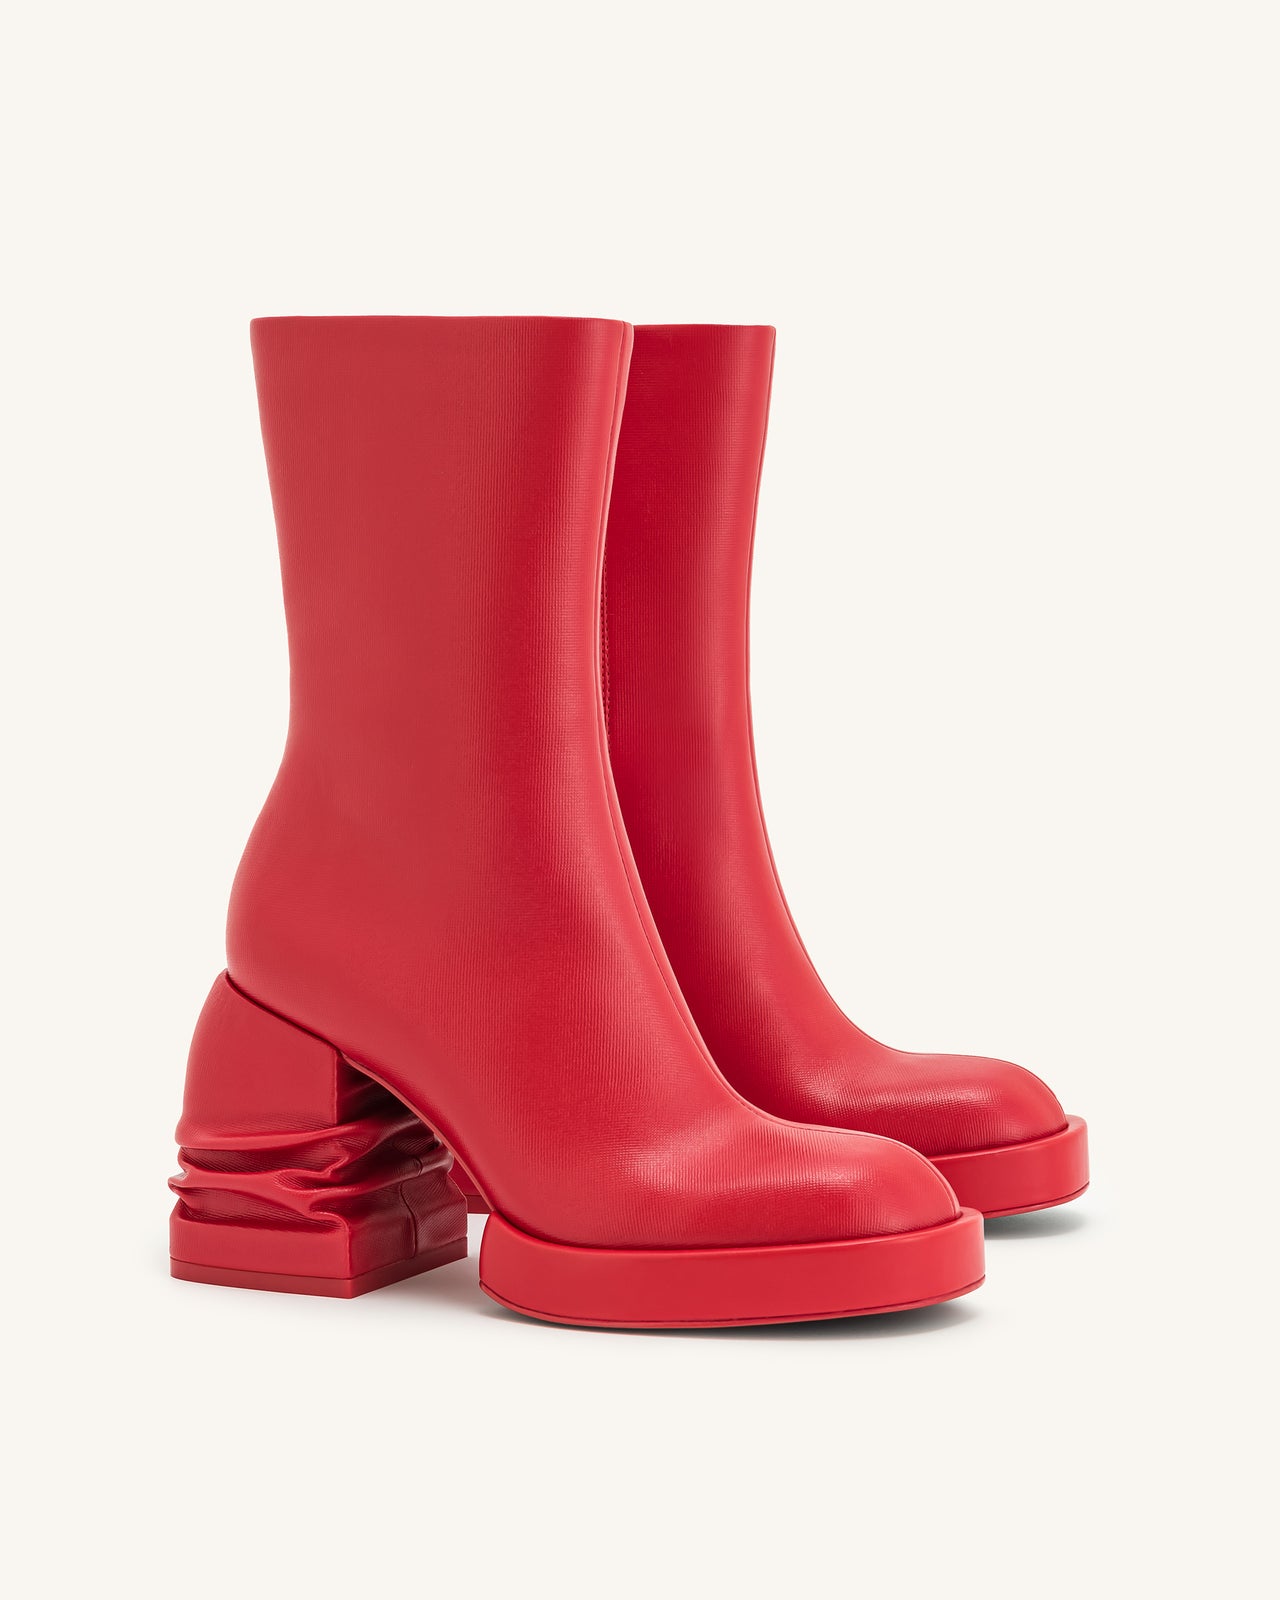 Saylor Round Toe Platform Ankle Boots - Red